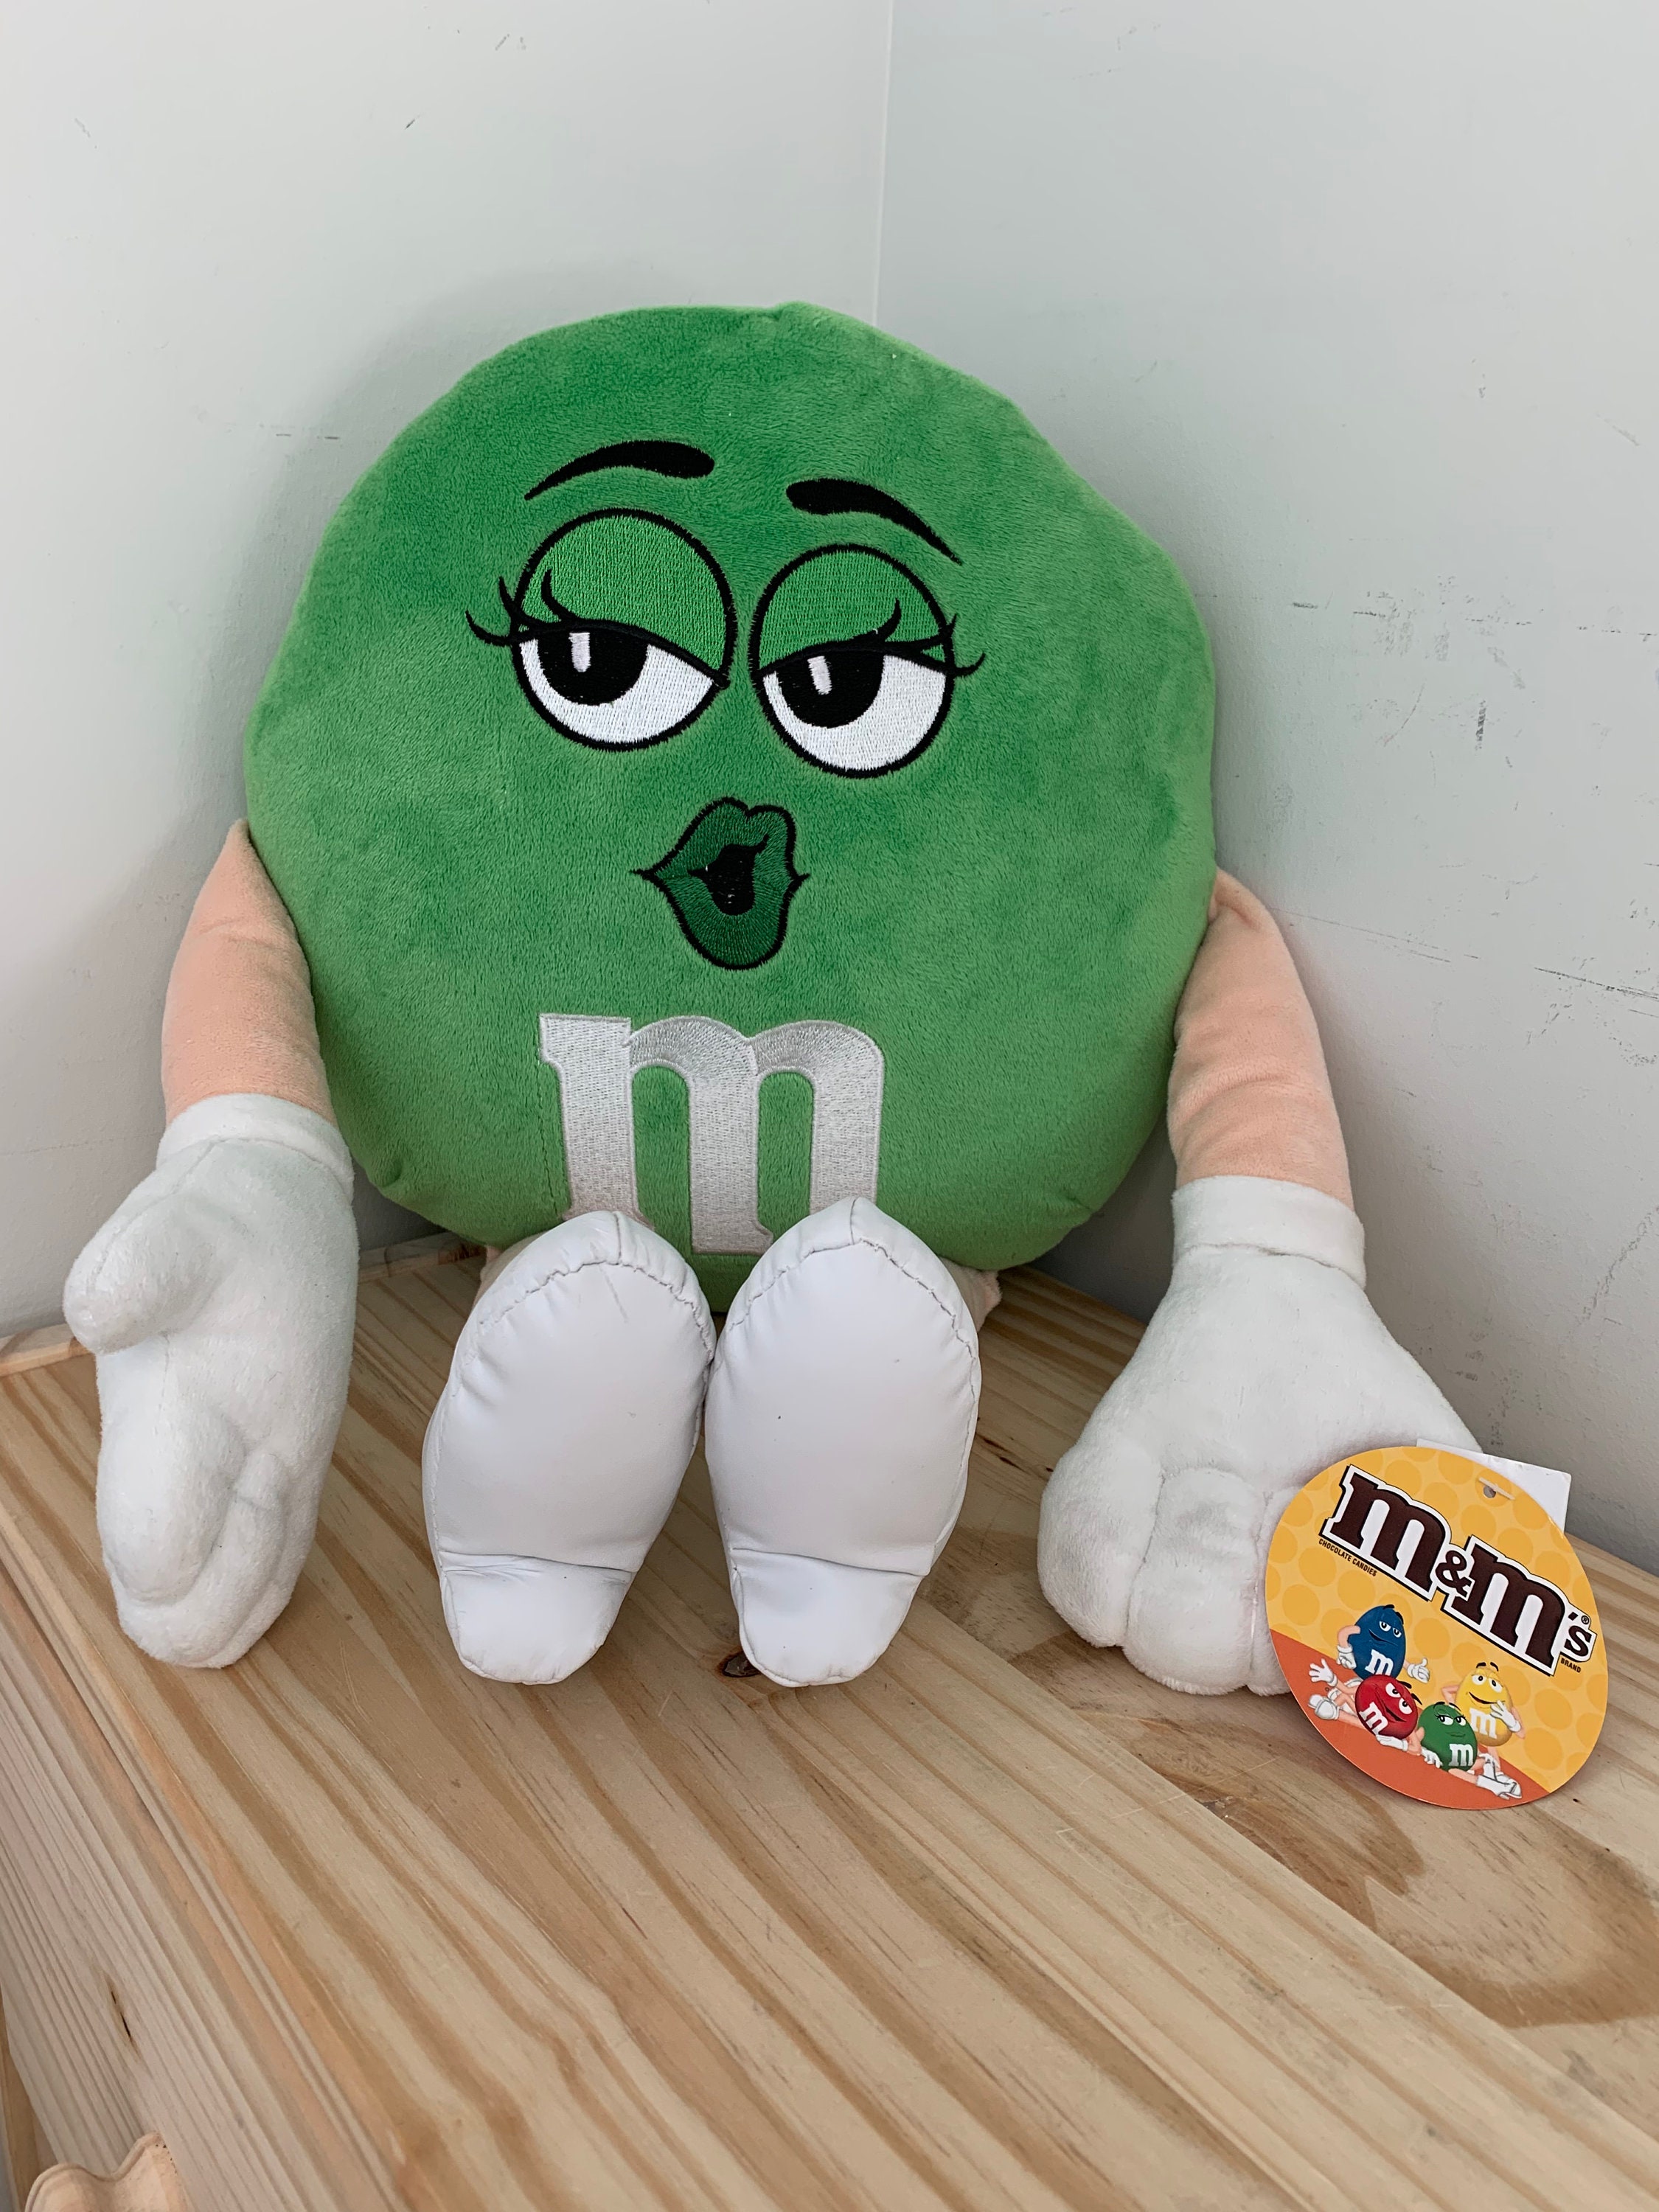 M&M'S, Other, Mm Green Character Plush Pillow 6 Inches